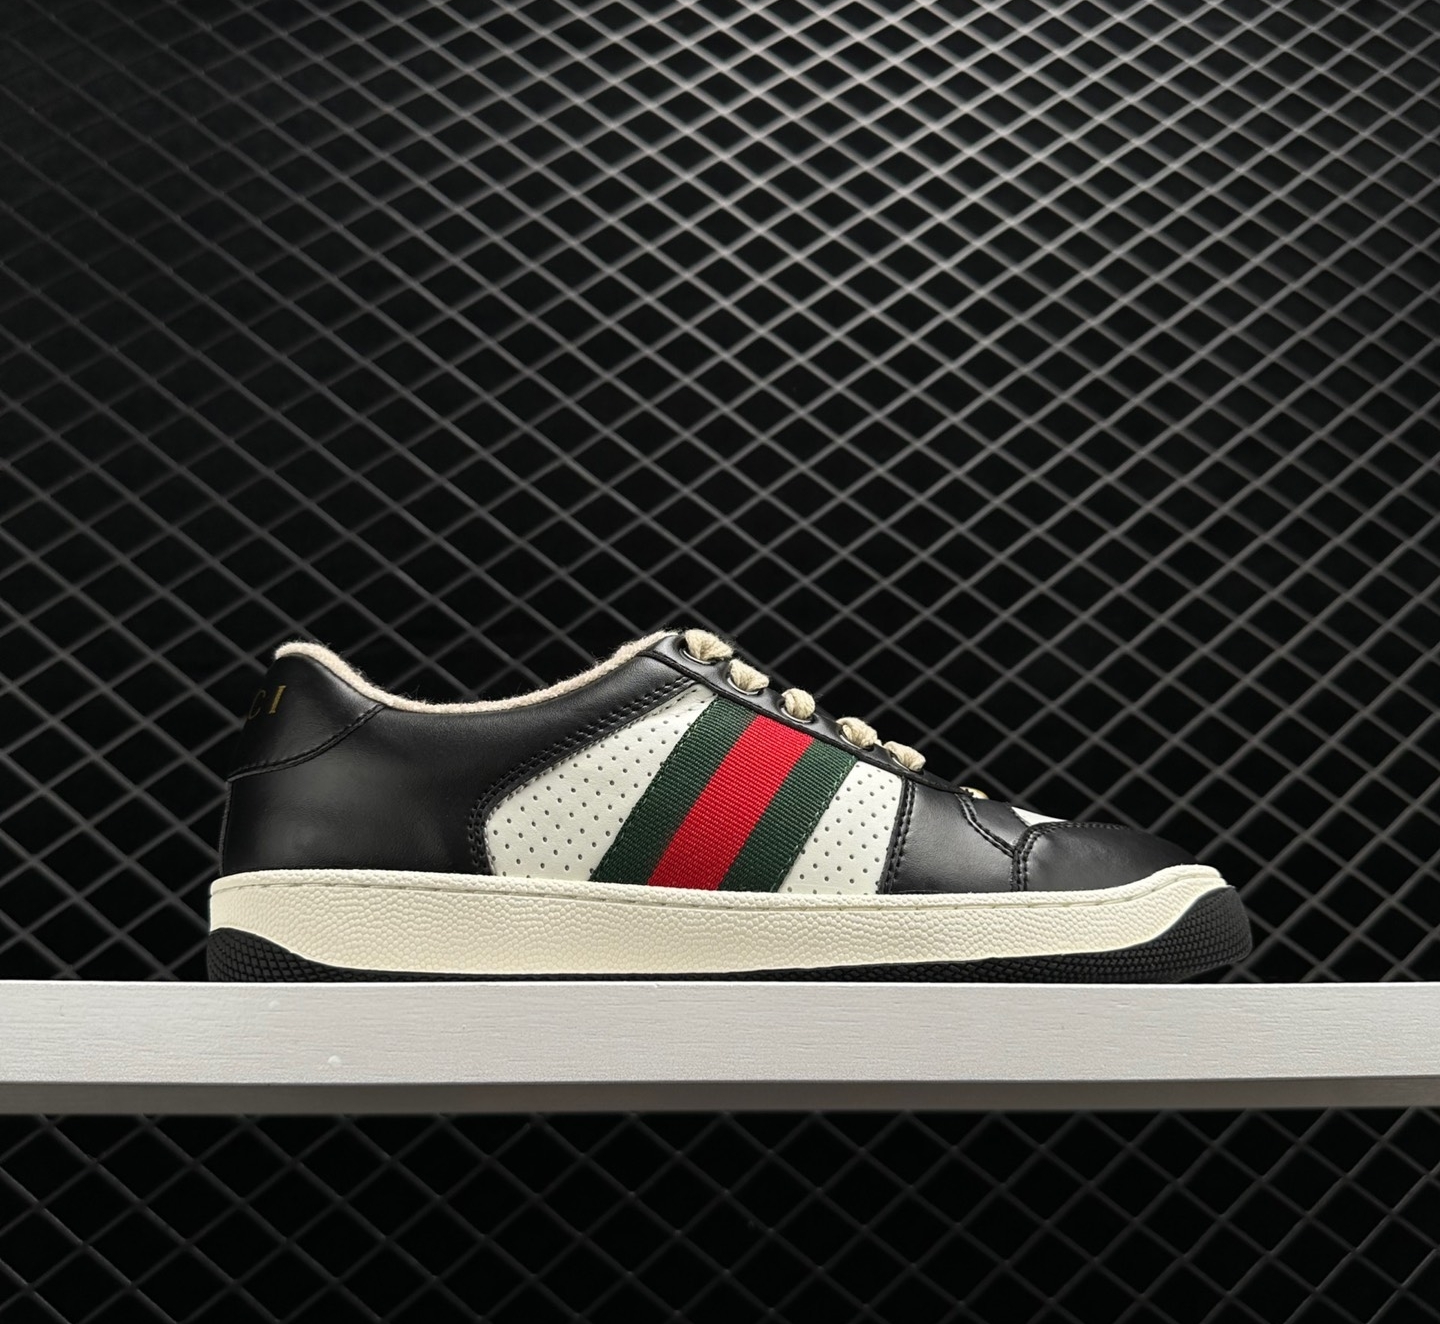 Gucci Screener Black White Green Red Web 546163 AAA4S 1061 - Stylish and Trendy Footwear for Any Occasion